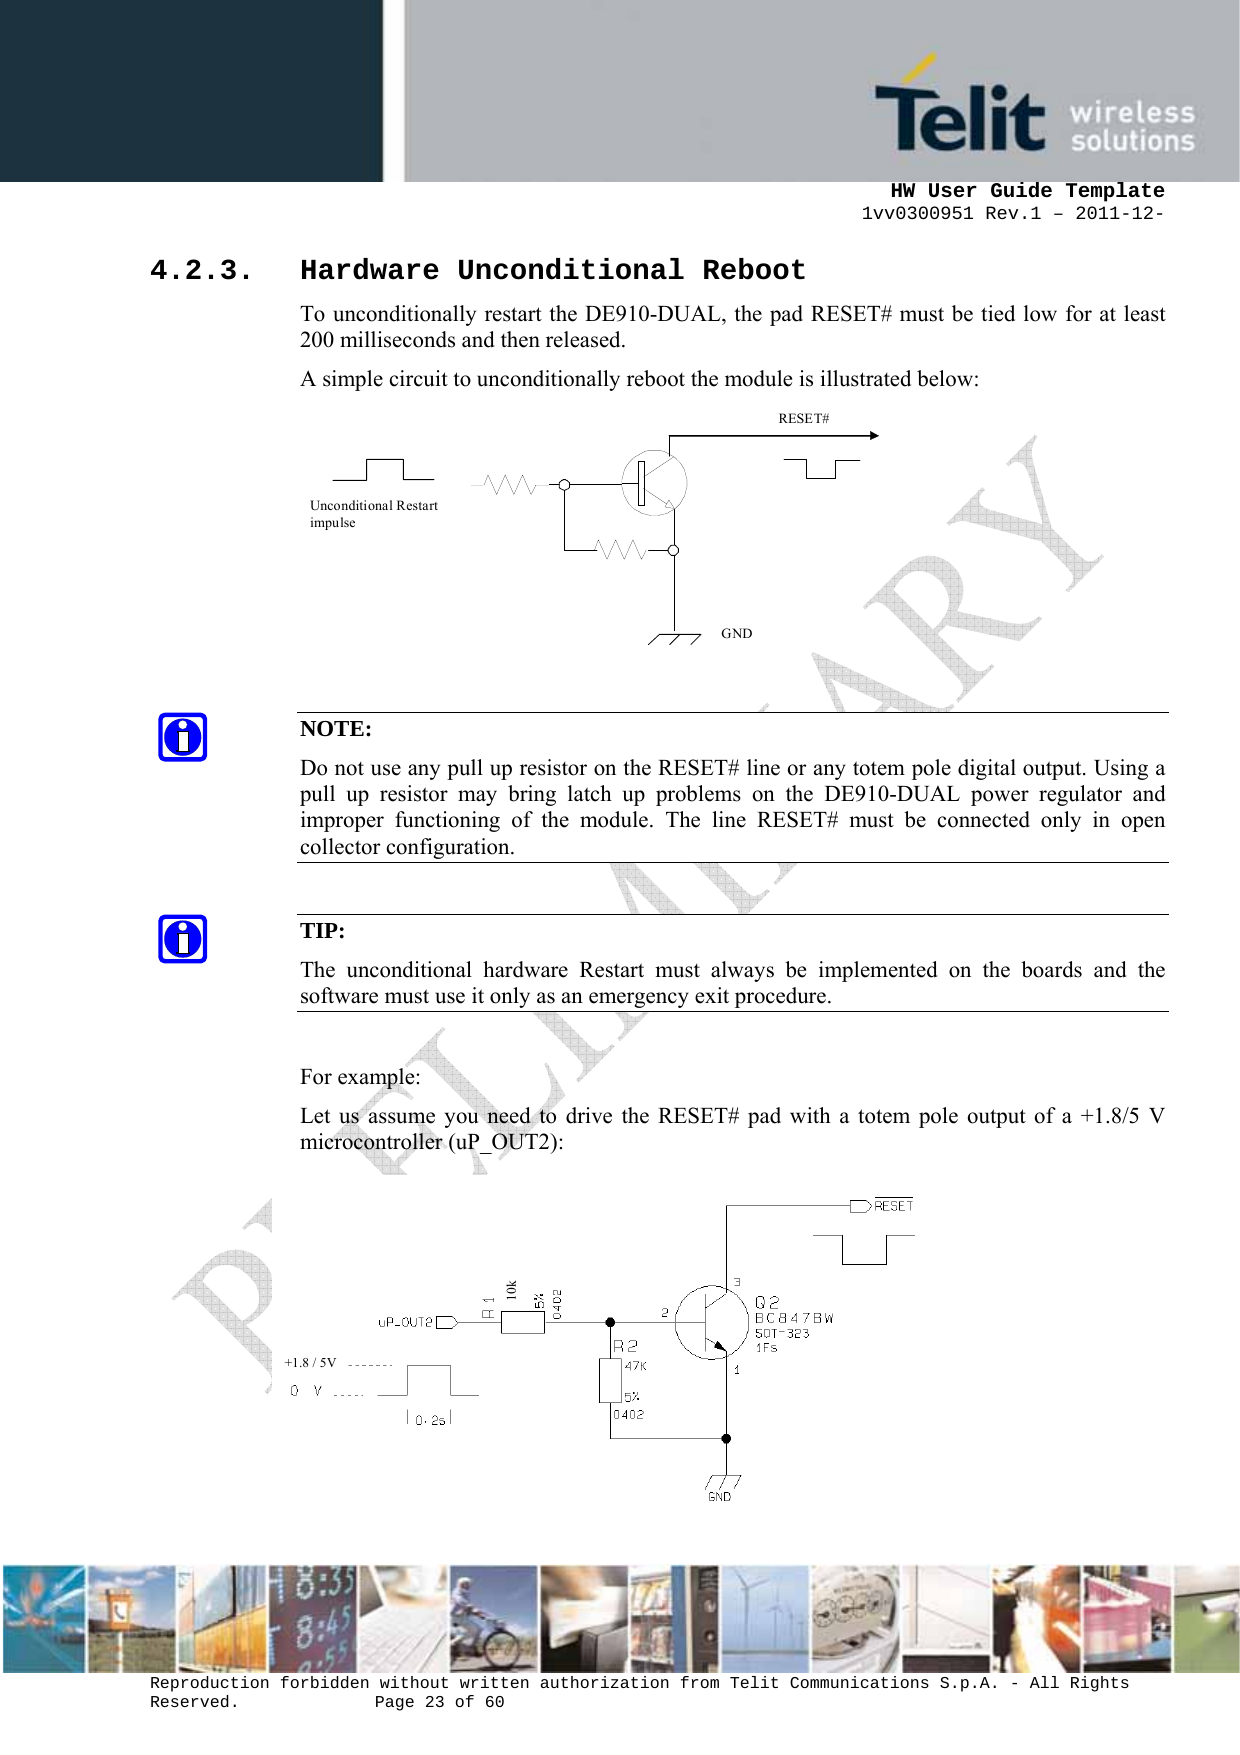      HW User Guide Template 1vv0300951 Rev.1 – 2011-12-  Reproduction forbidden without written authorization from Telit Communications S.p.A. - All Rights Reserved.    Page 23 of 60                                                     4.2.3. Hardware Unconditional Reboot To unconditionally restart the DE910-DUAL, the pad RESET# must be tied low for at least 200 milliseconds and then released. A simple circuit to unconditionally reboot the module is illustrated below:    RESET# Unconditional Restart impulse   GND    NOTE: Do not use any pull up resistor on the RESET# line or any totem pole digital output. Using a pull up resistor may bring latch up problems on the DE910-DUAL power regulator and improper functioning of the module. The line RESET# must be connected only in open collector configuration.  TIP: The unconditional hardware Restart must always be implemented on the boards and the software must use it only as an emergency exit procedure.  For example: Let us assume you need to drive the RESET# pad with a totem pole output of a +1.8/5 V microcontroller (uP_OUT2):  10k +1.8 / 5V 